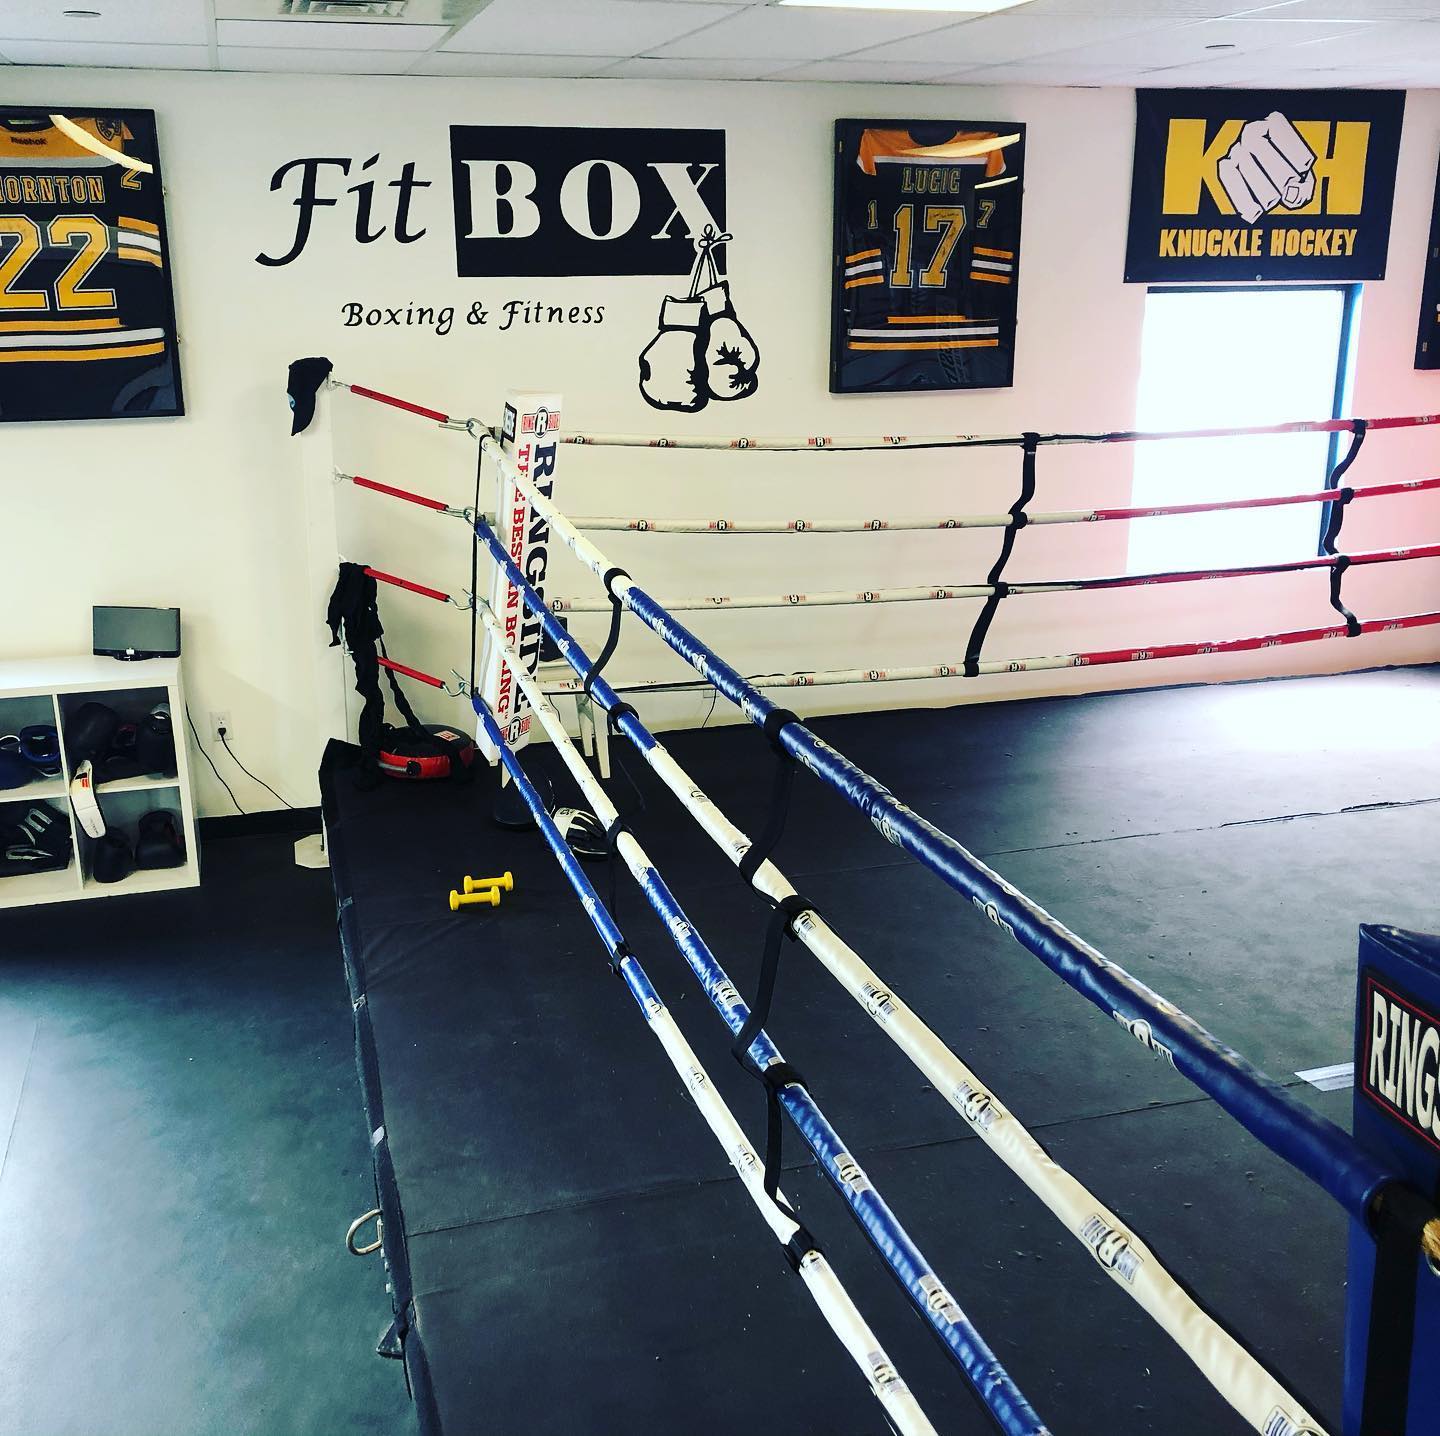 We have been waiting on the Governor and hoping soon to be back punching again . 
All Private One on One Boxing workouts will be available . Contact us today to learn more . Call /text (781)727-9503 or email Fitbox@outlook.com.